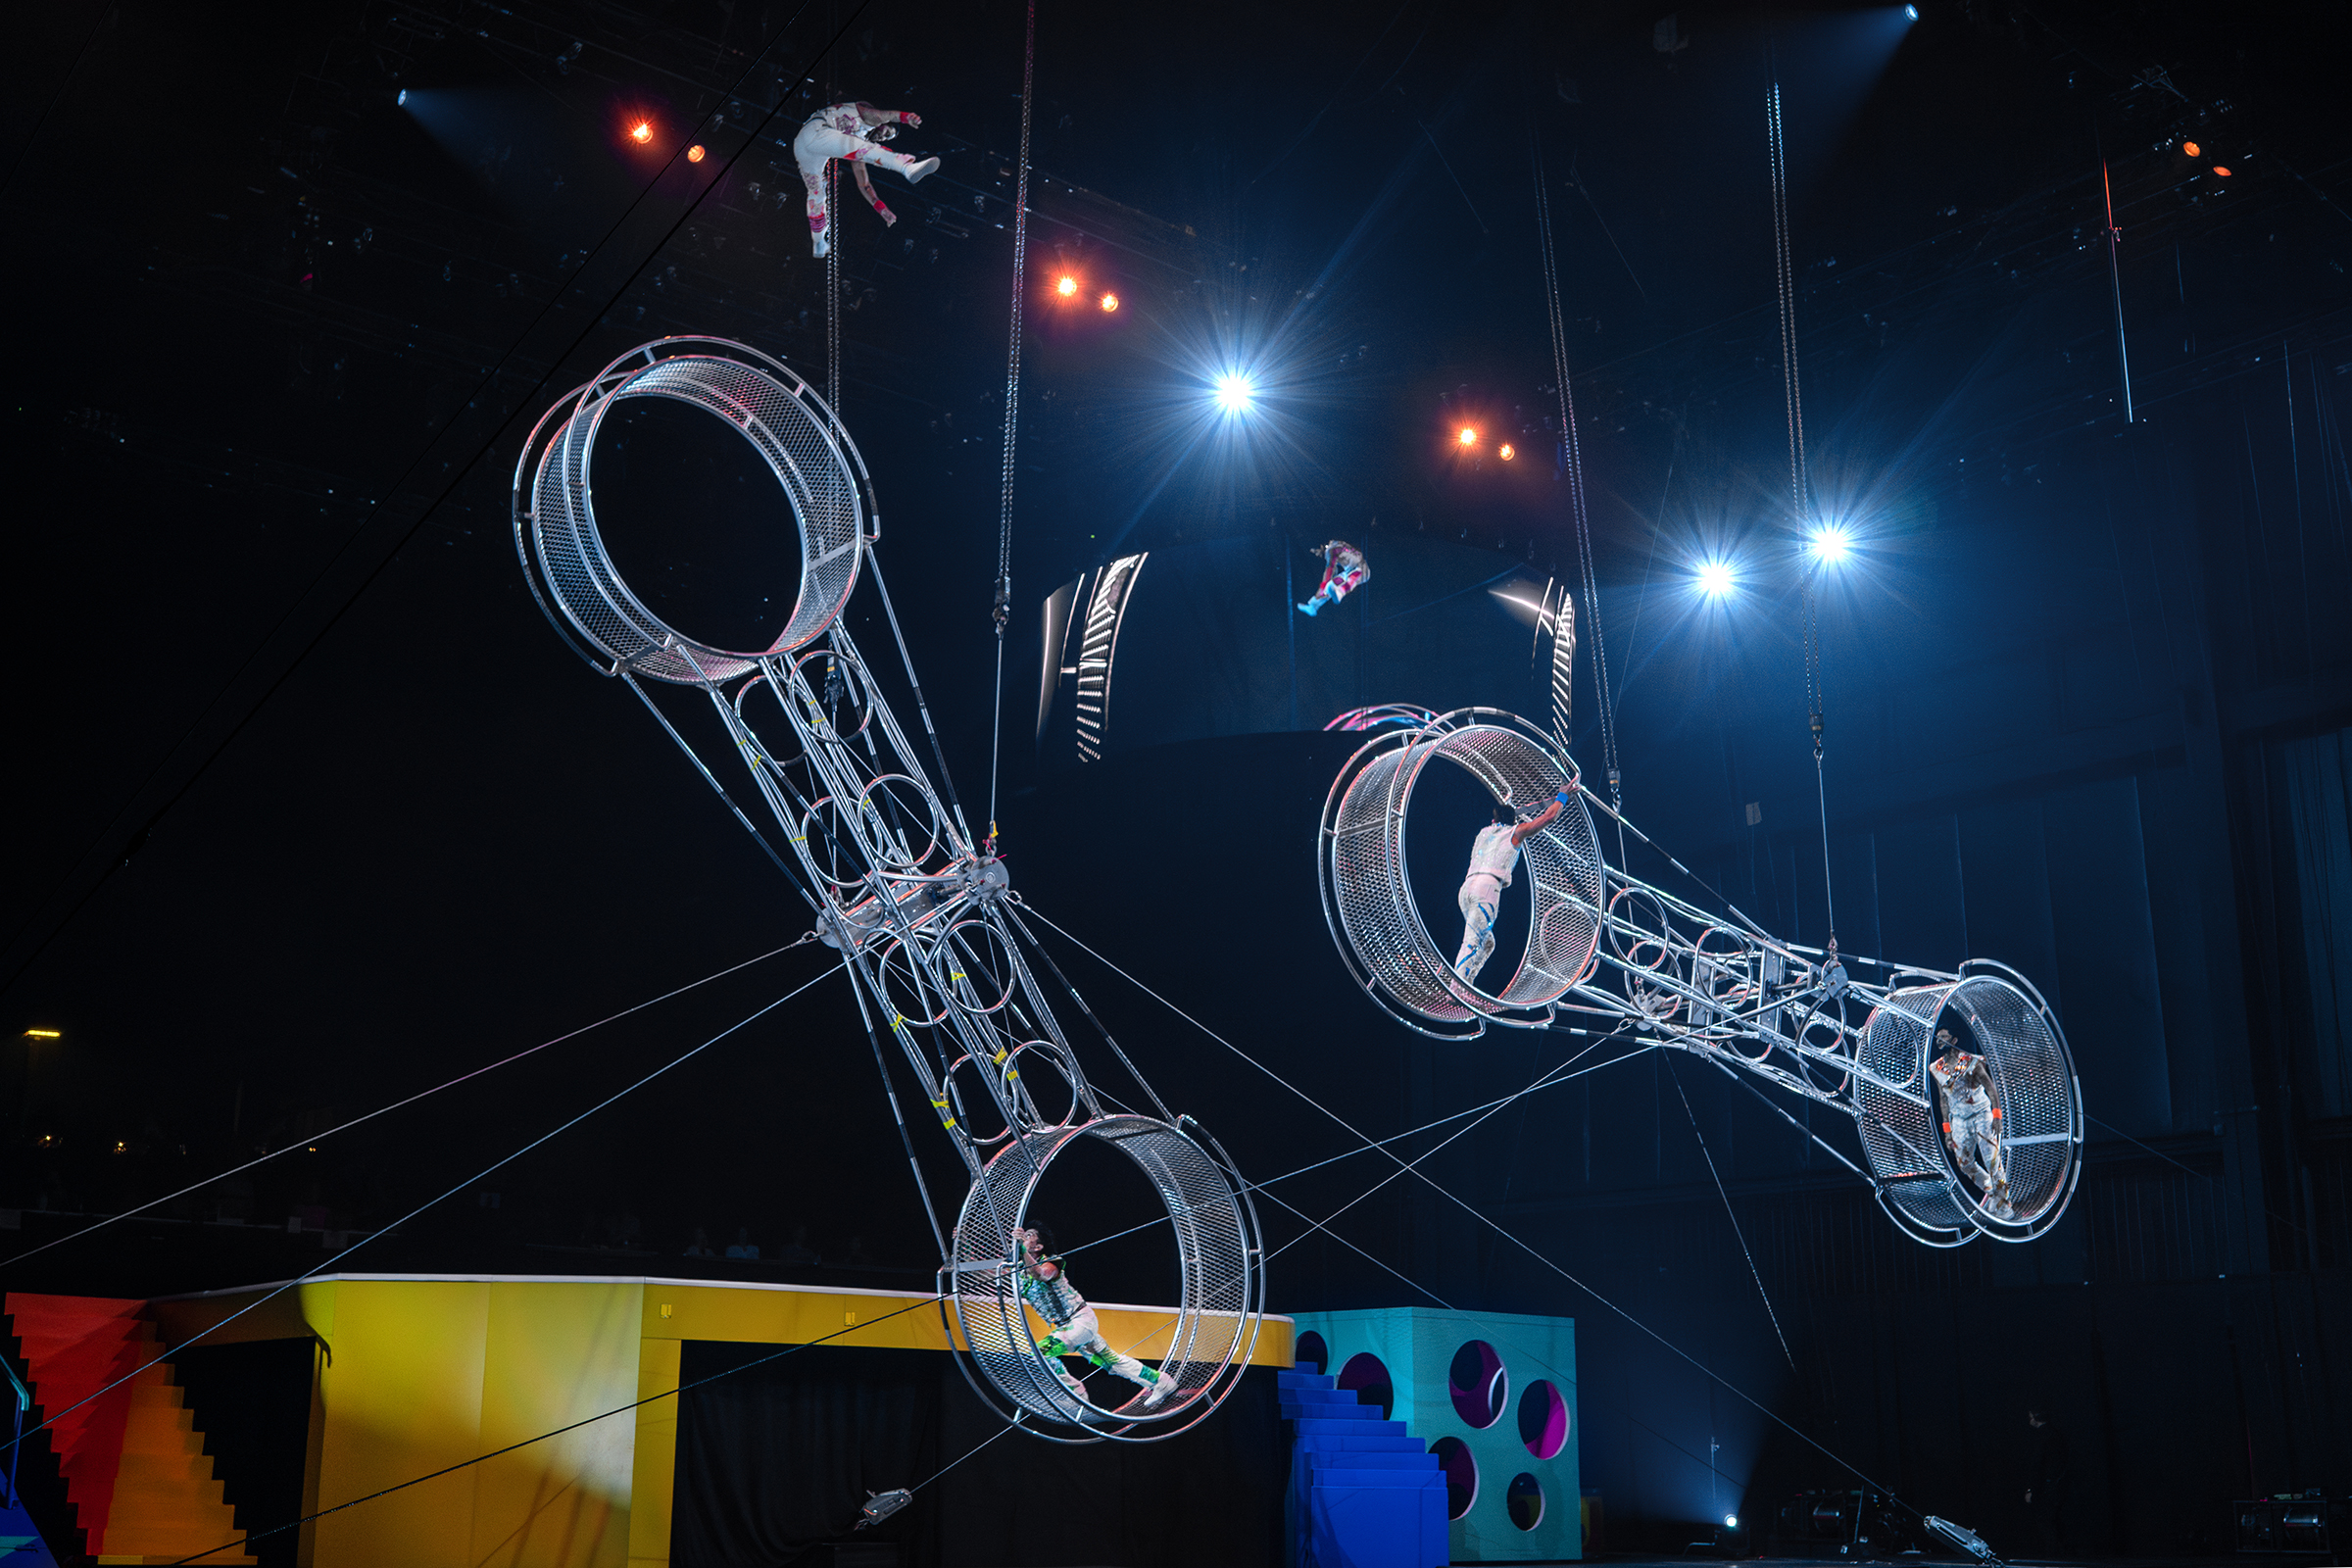 Four acrobatic performers power the Double Wheel of Destiny, two side-by-side wheels that rotate independently at high speeds and hang at 30 feet above the ground. Photo courtesy of Feld Entertainment. 